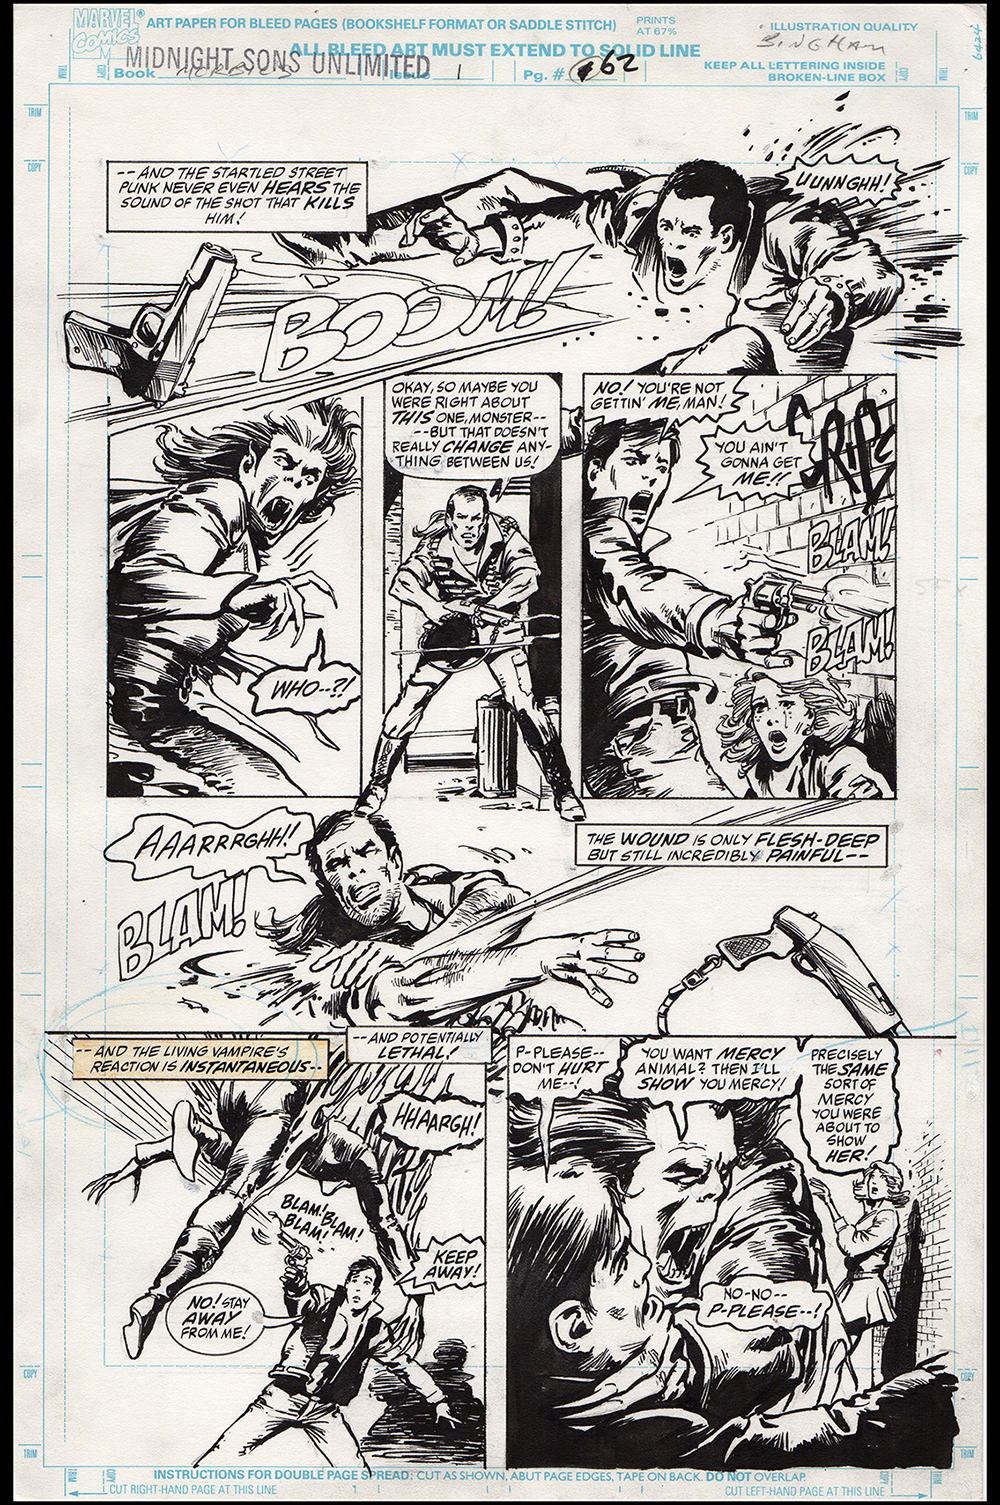 Image: Midnight Sons Unlimited #1 page 62 Art by Jerry Bingham